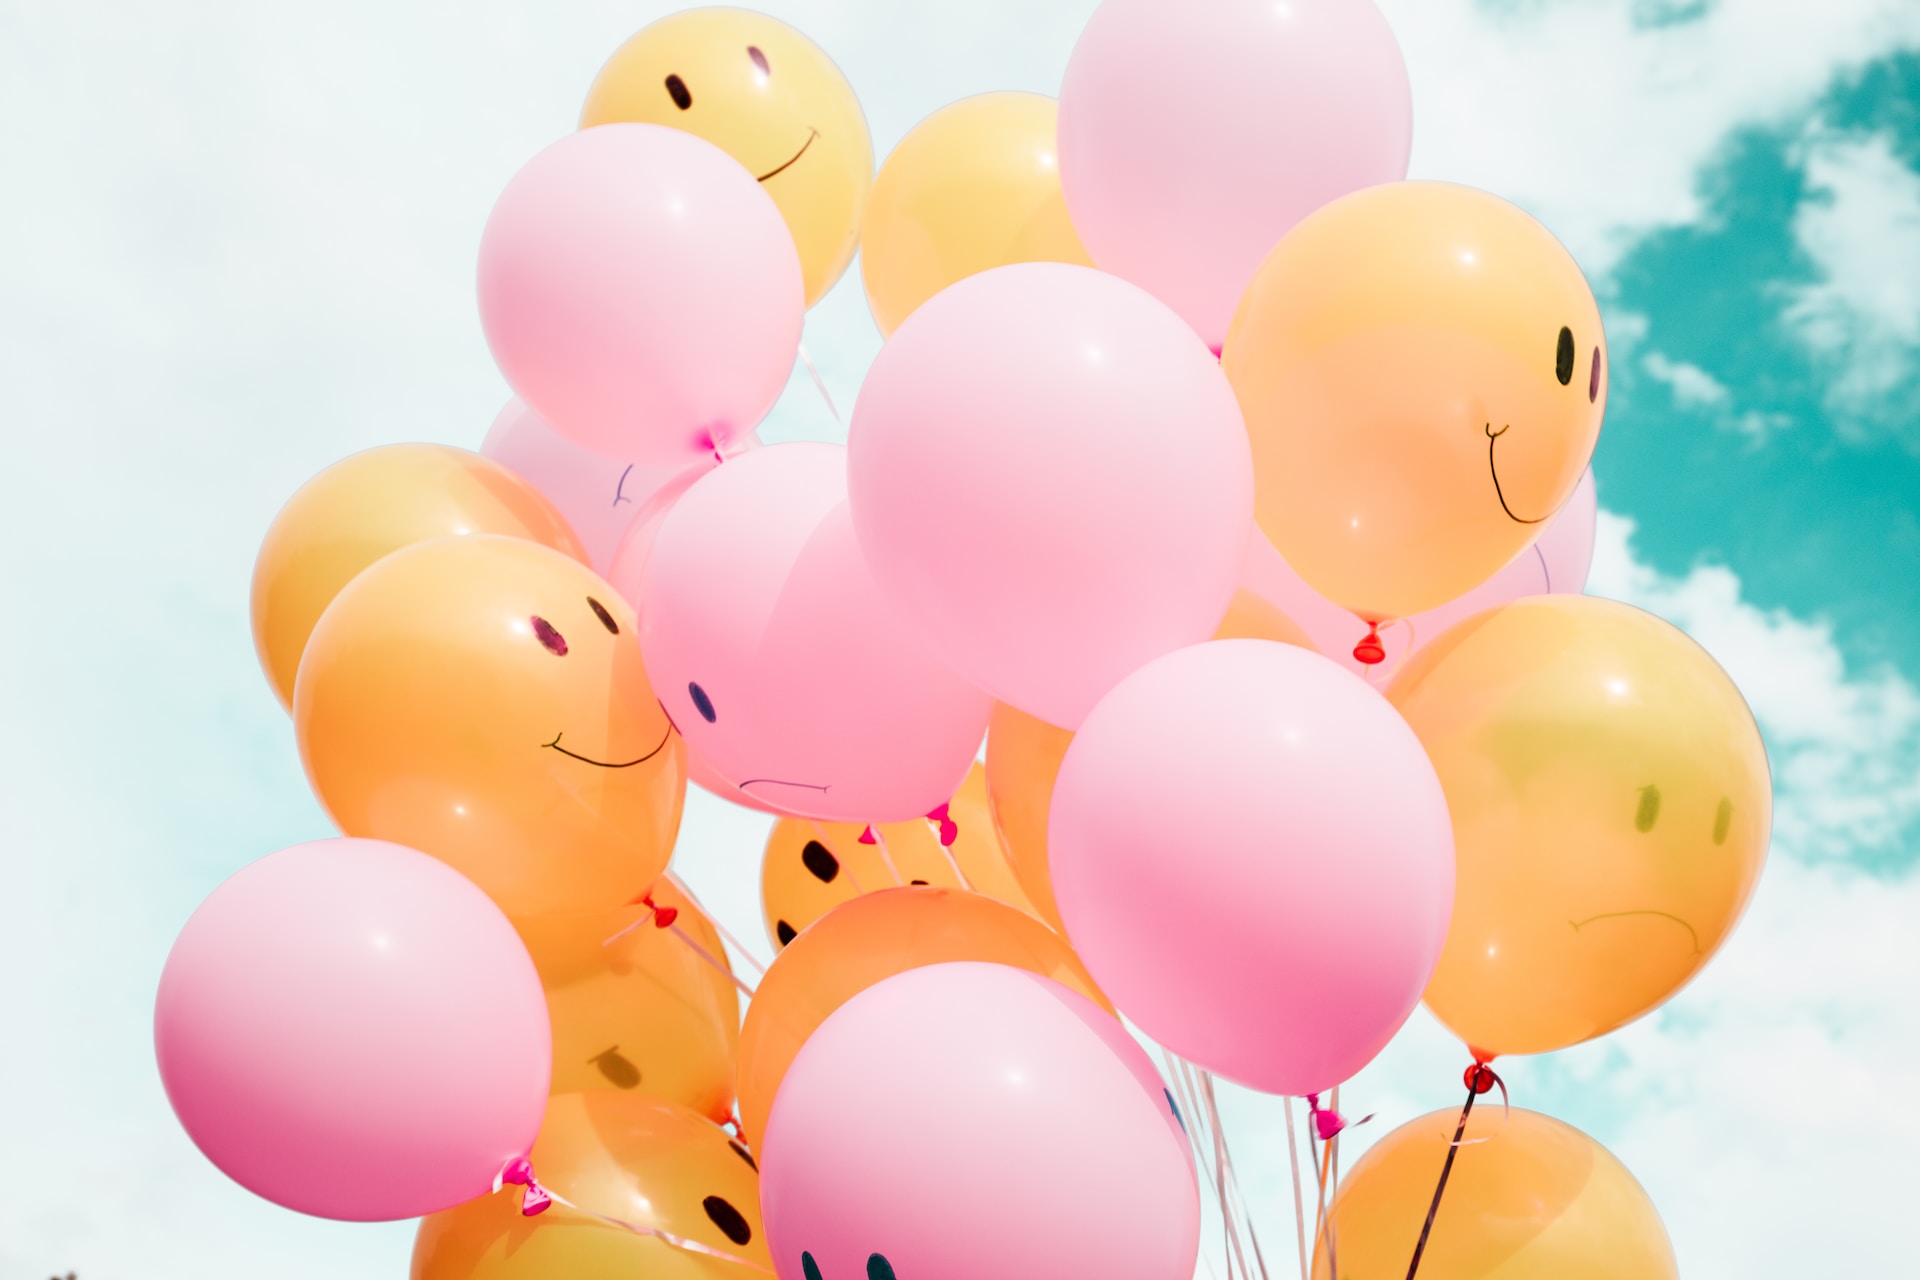 pink and yellow balloons with smiles and positive messages